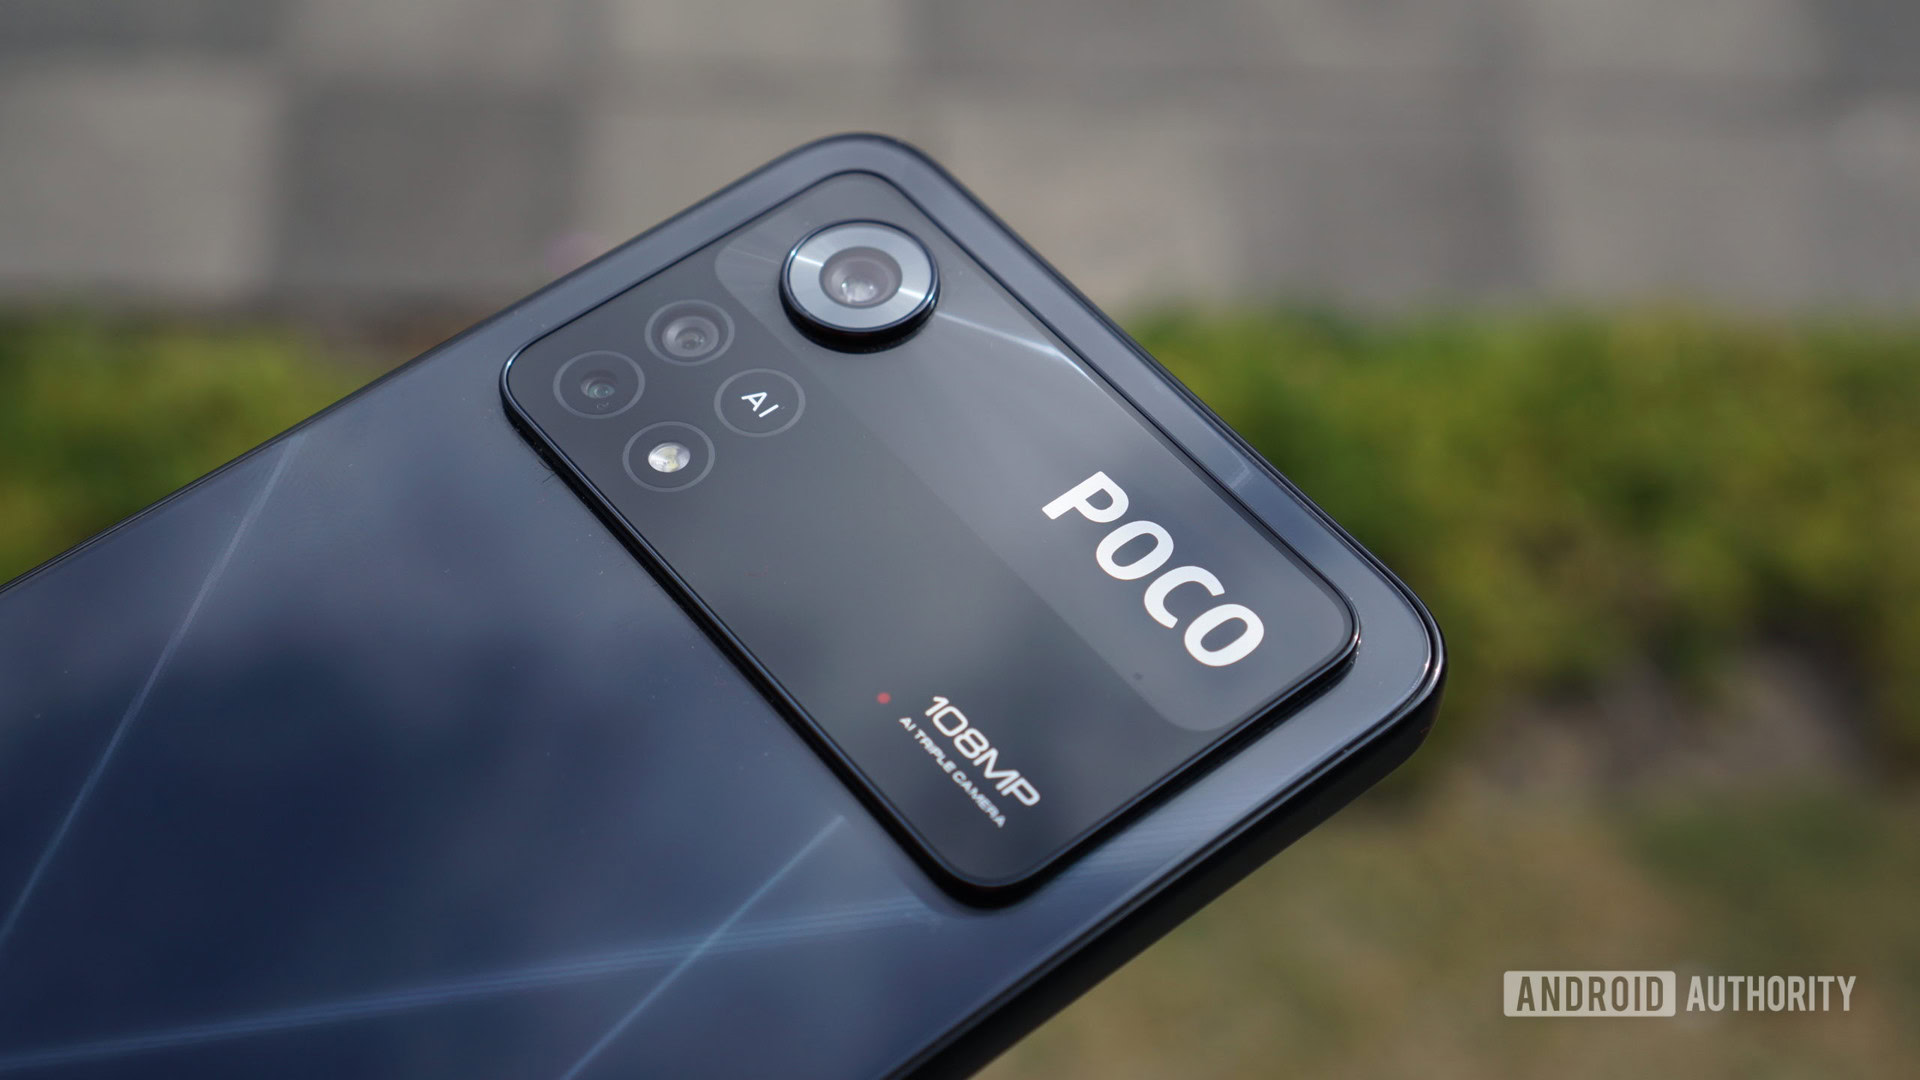 POCO X4 Pro review: Nice screen, long-lasting battery, pity about the bugs